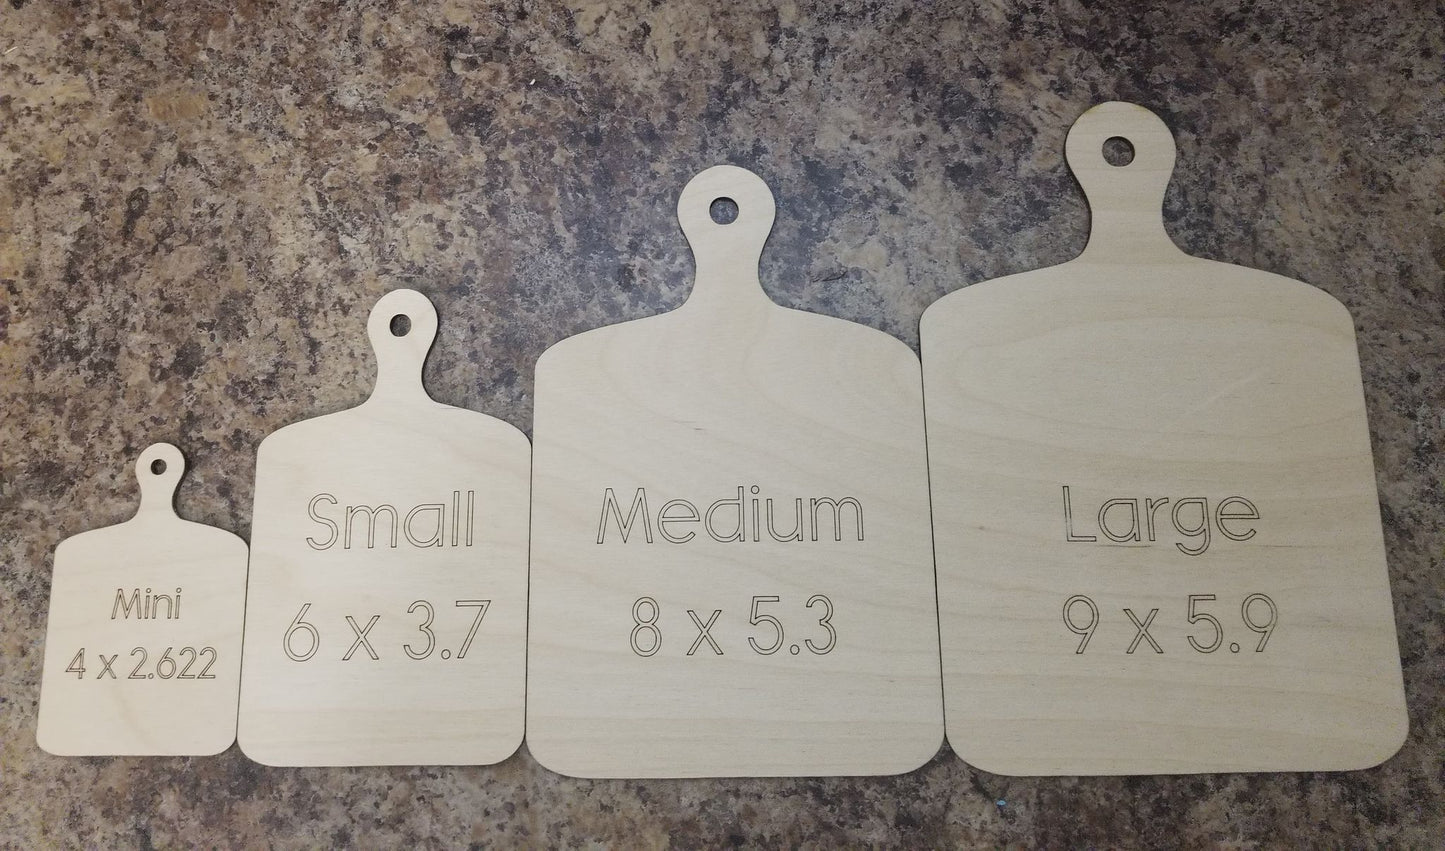 Wood Tag  Wood Signs  Wood Blanks  Transfers  Sign Bundles  Shape Blanks  Ornament  Laser DIY  Kitchen  Fun  Door Tags  Door Tag  Cutting board  Cutting  Cute  Crafty Gifts  Chalk Couture  Blank Shapes